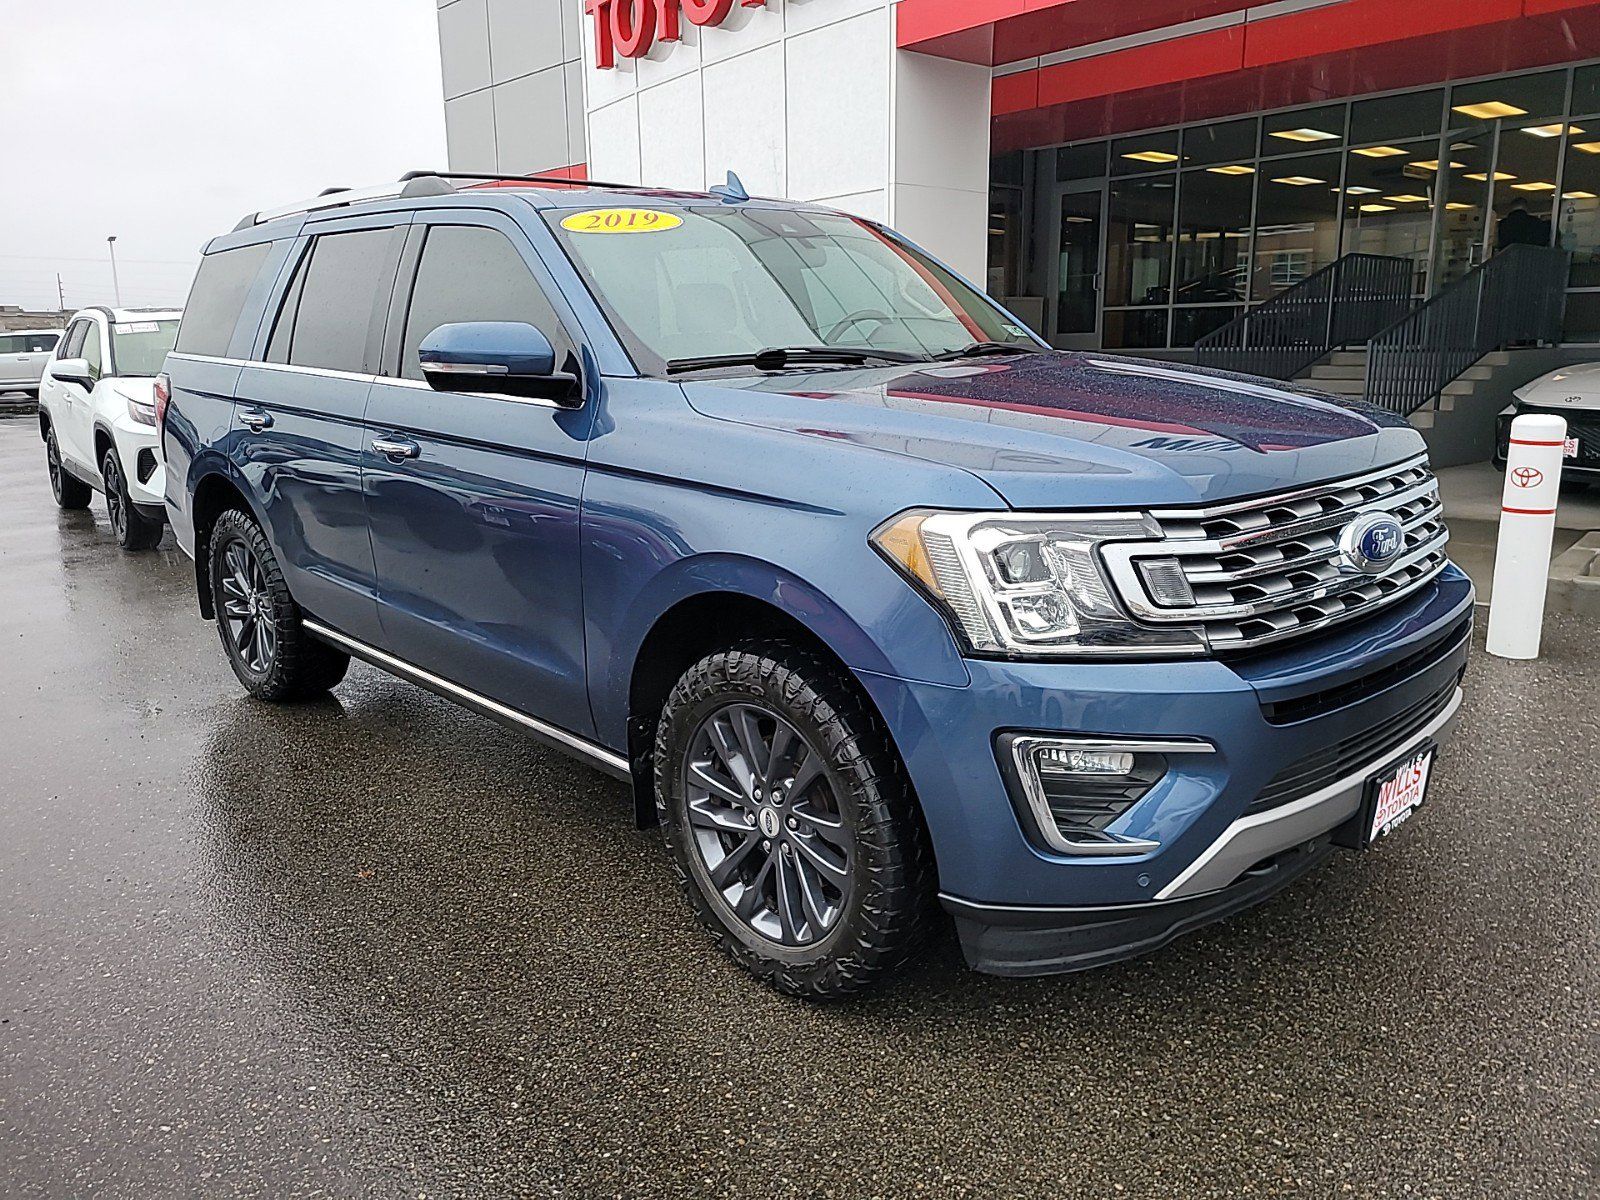 2019 - Ford - Expedition - $28,197